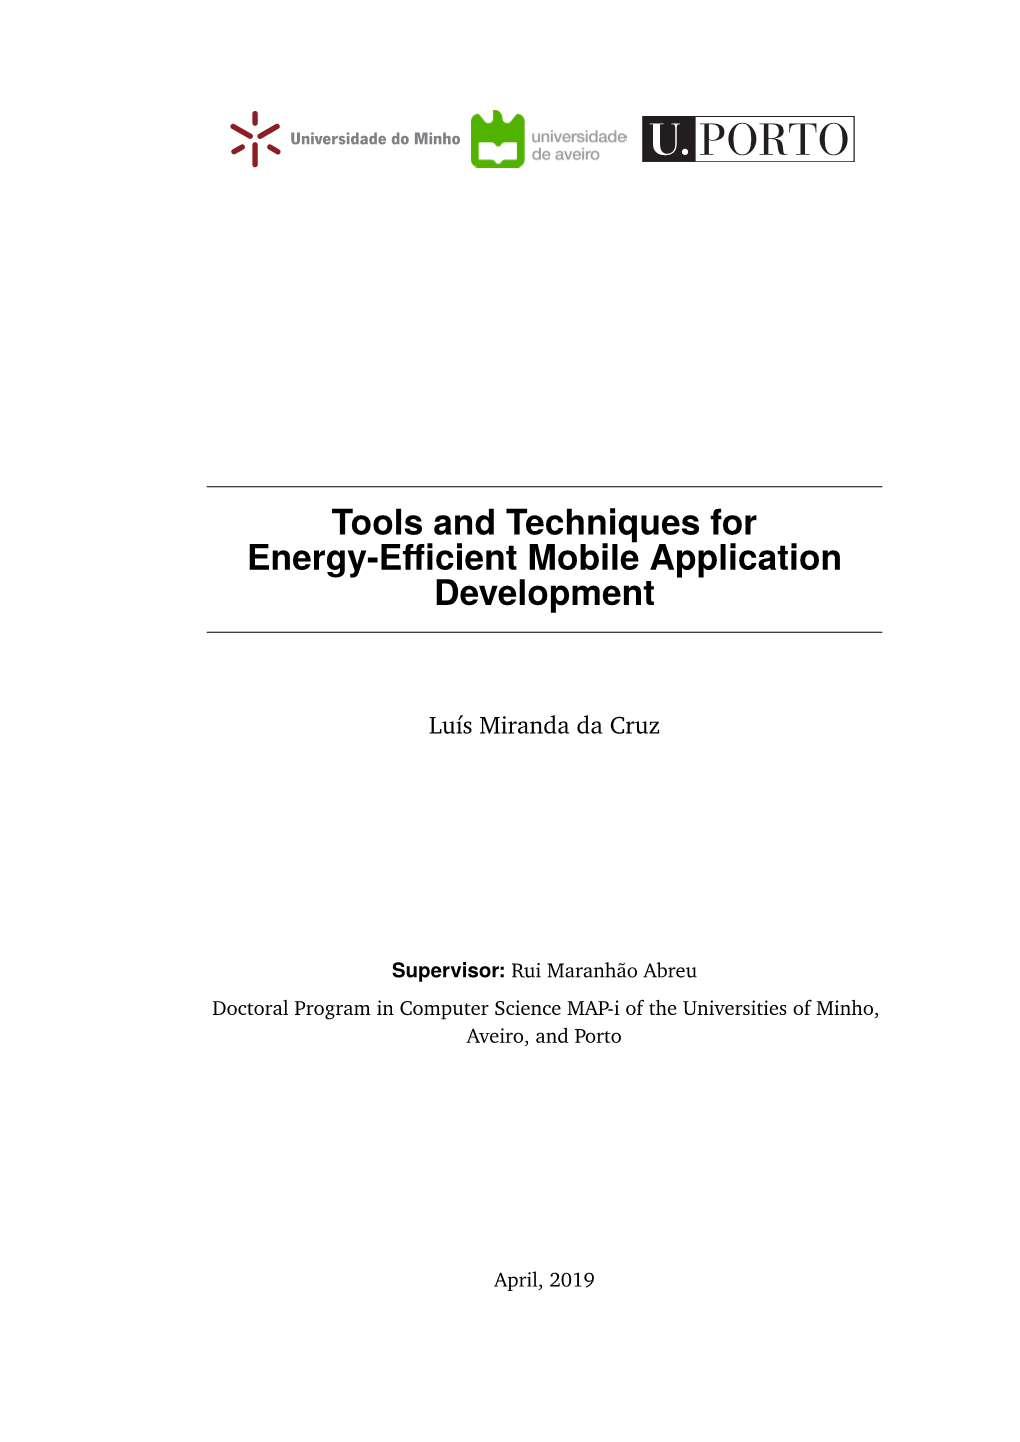 Tools and Techniques for Energy-Efficient Mobile Application